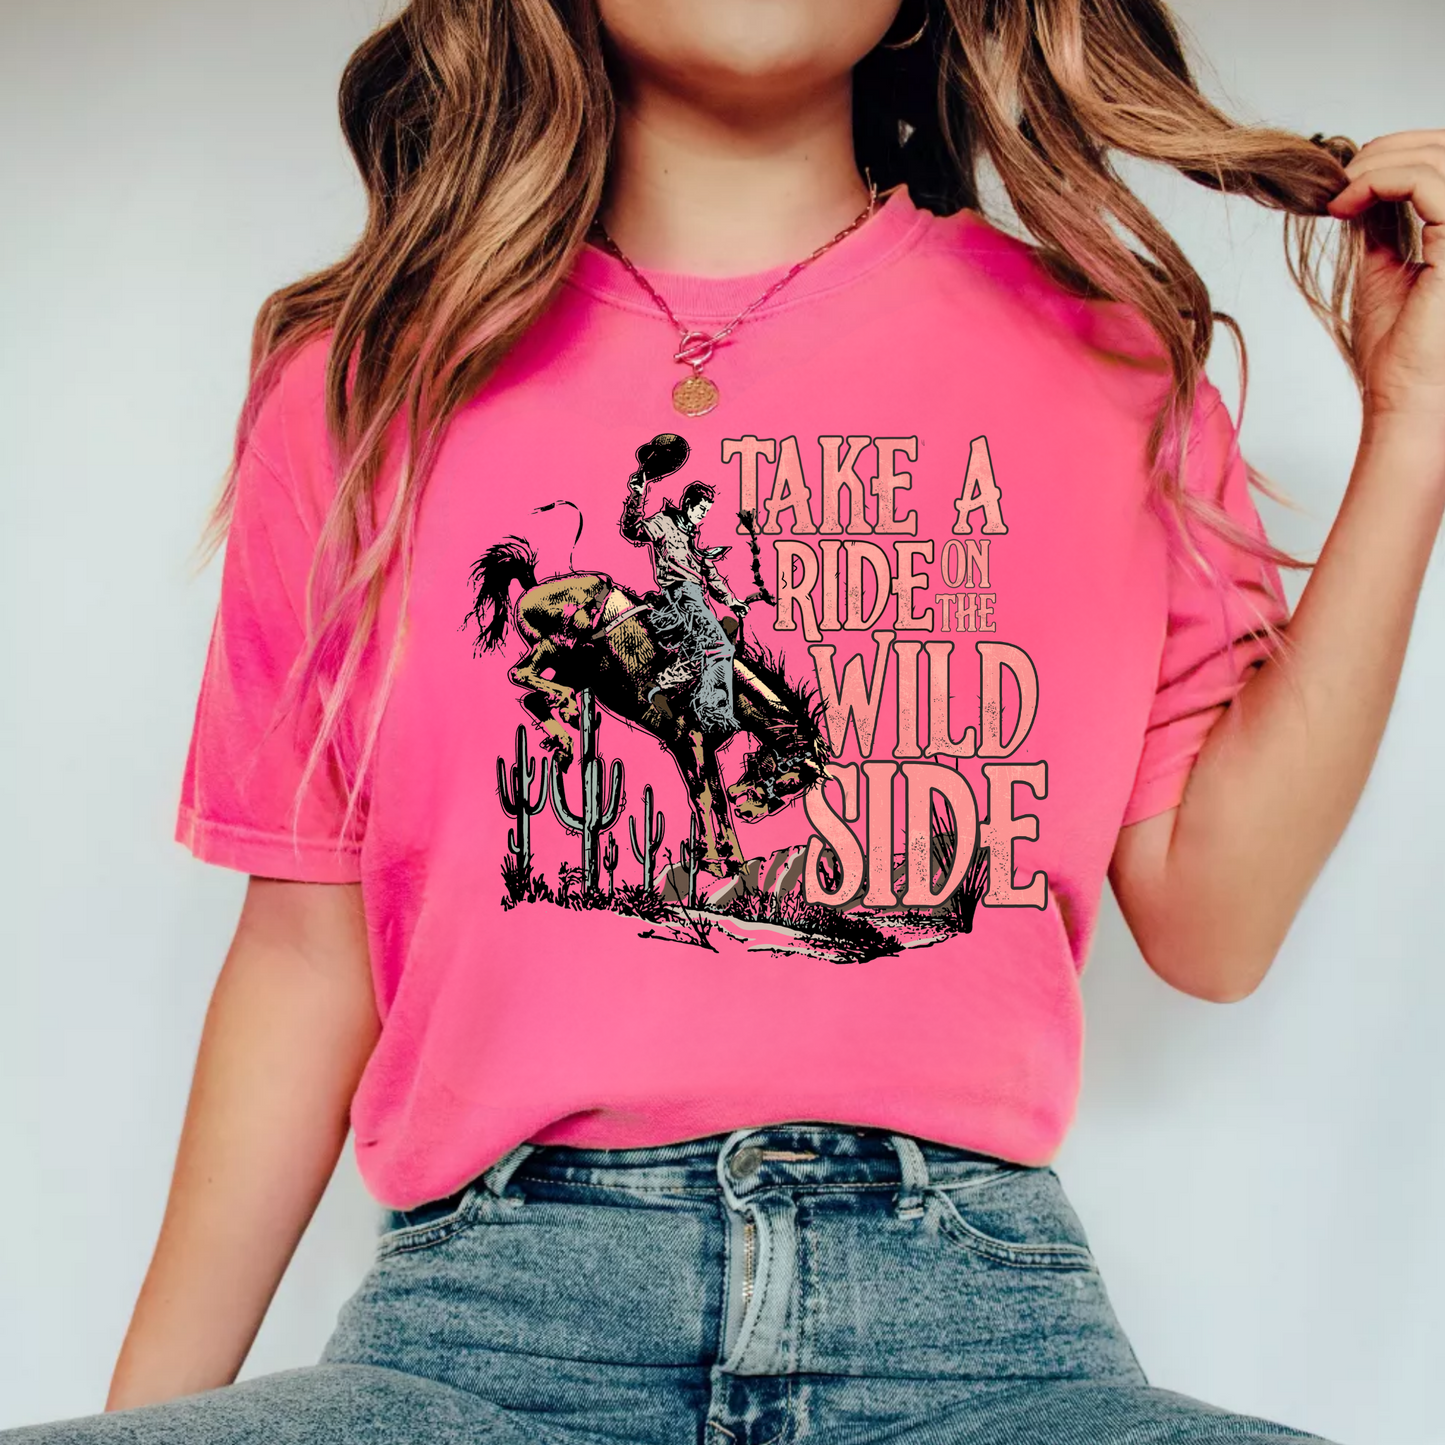 (Shirt Not Included) Take a Ride on the Wild Side - Clear Film Transfer